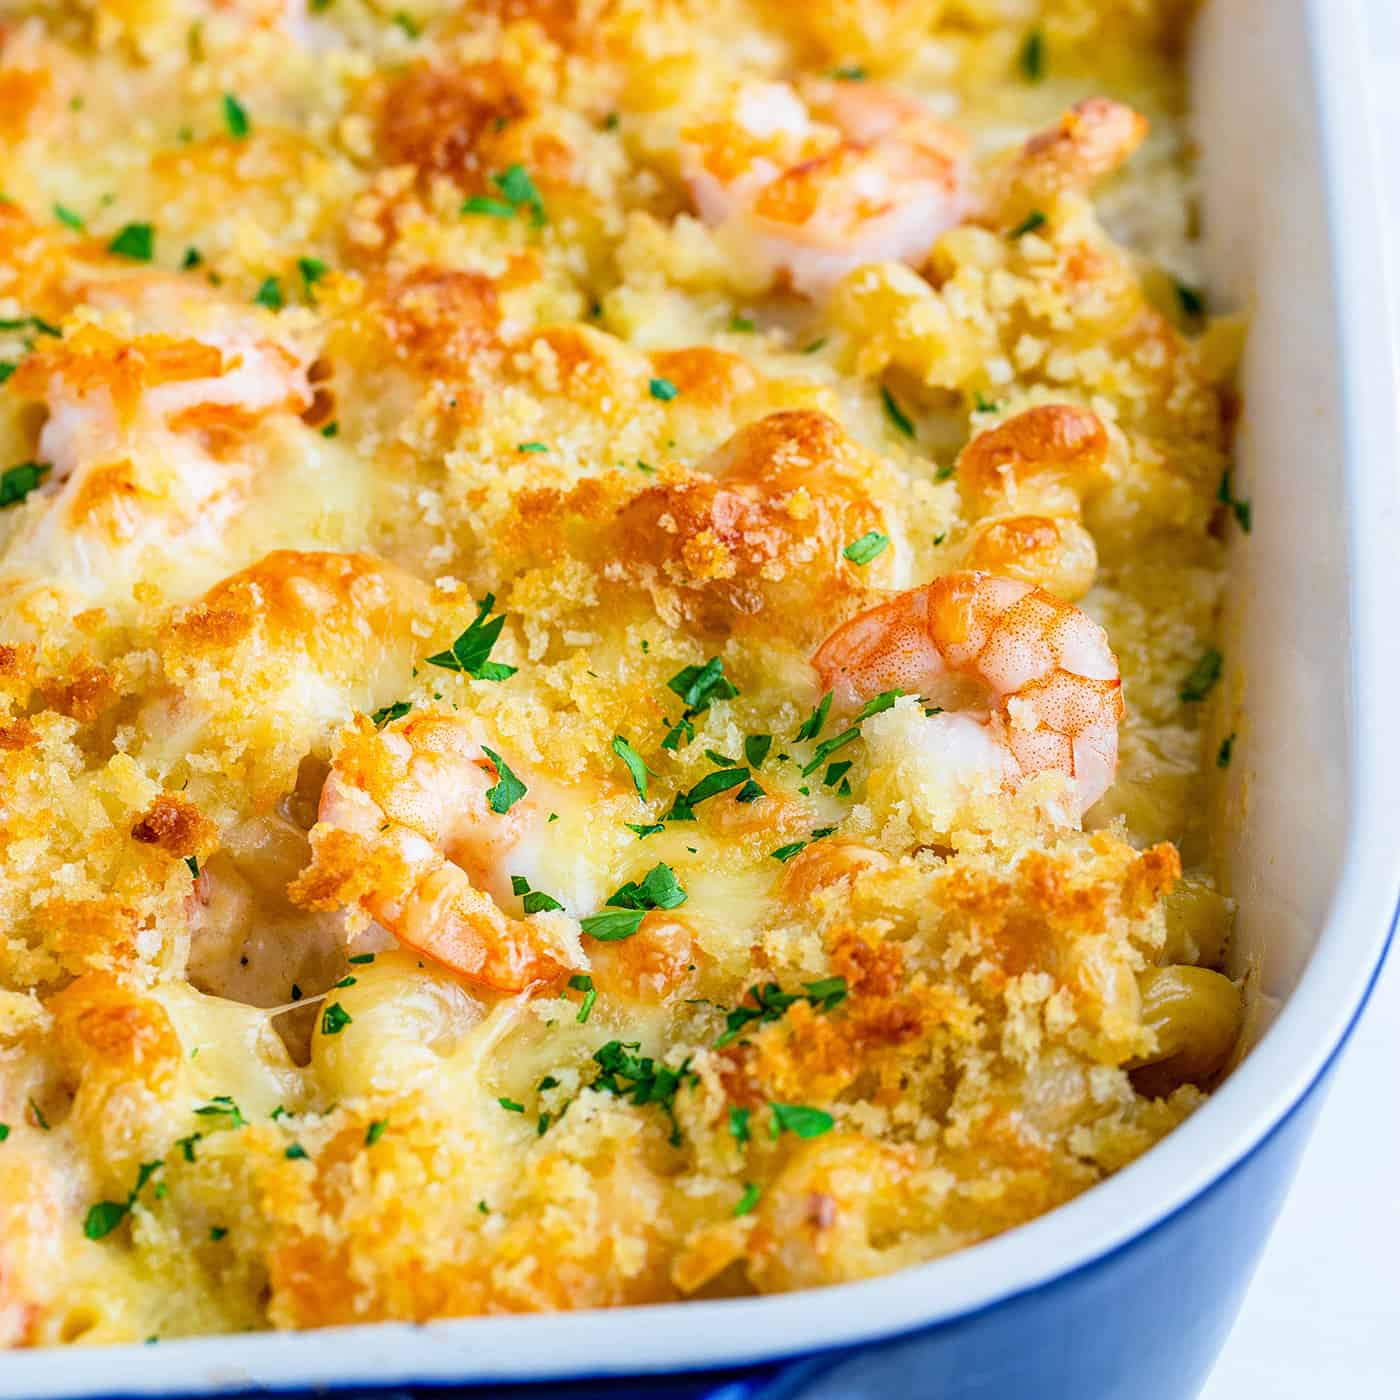 macaroni and cheese with shrimp, baked in a blue casserole dish